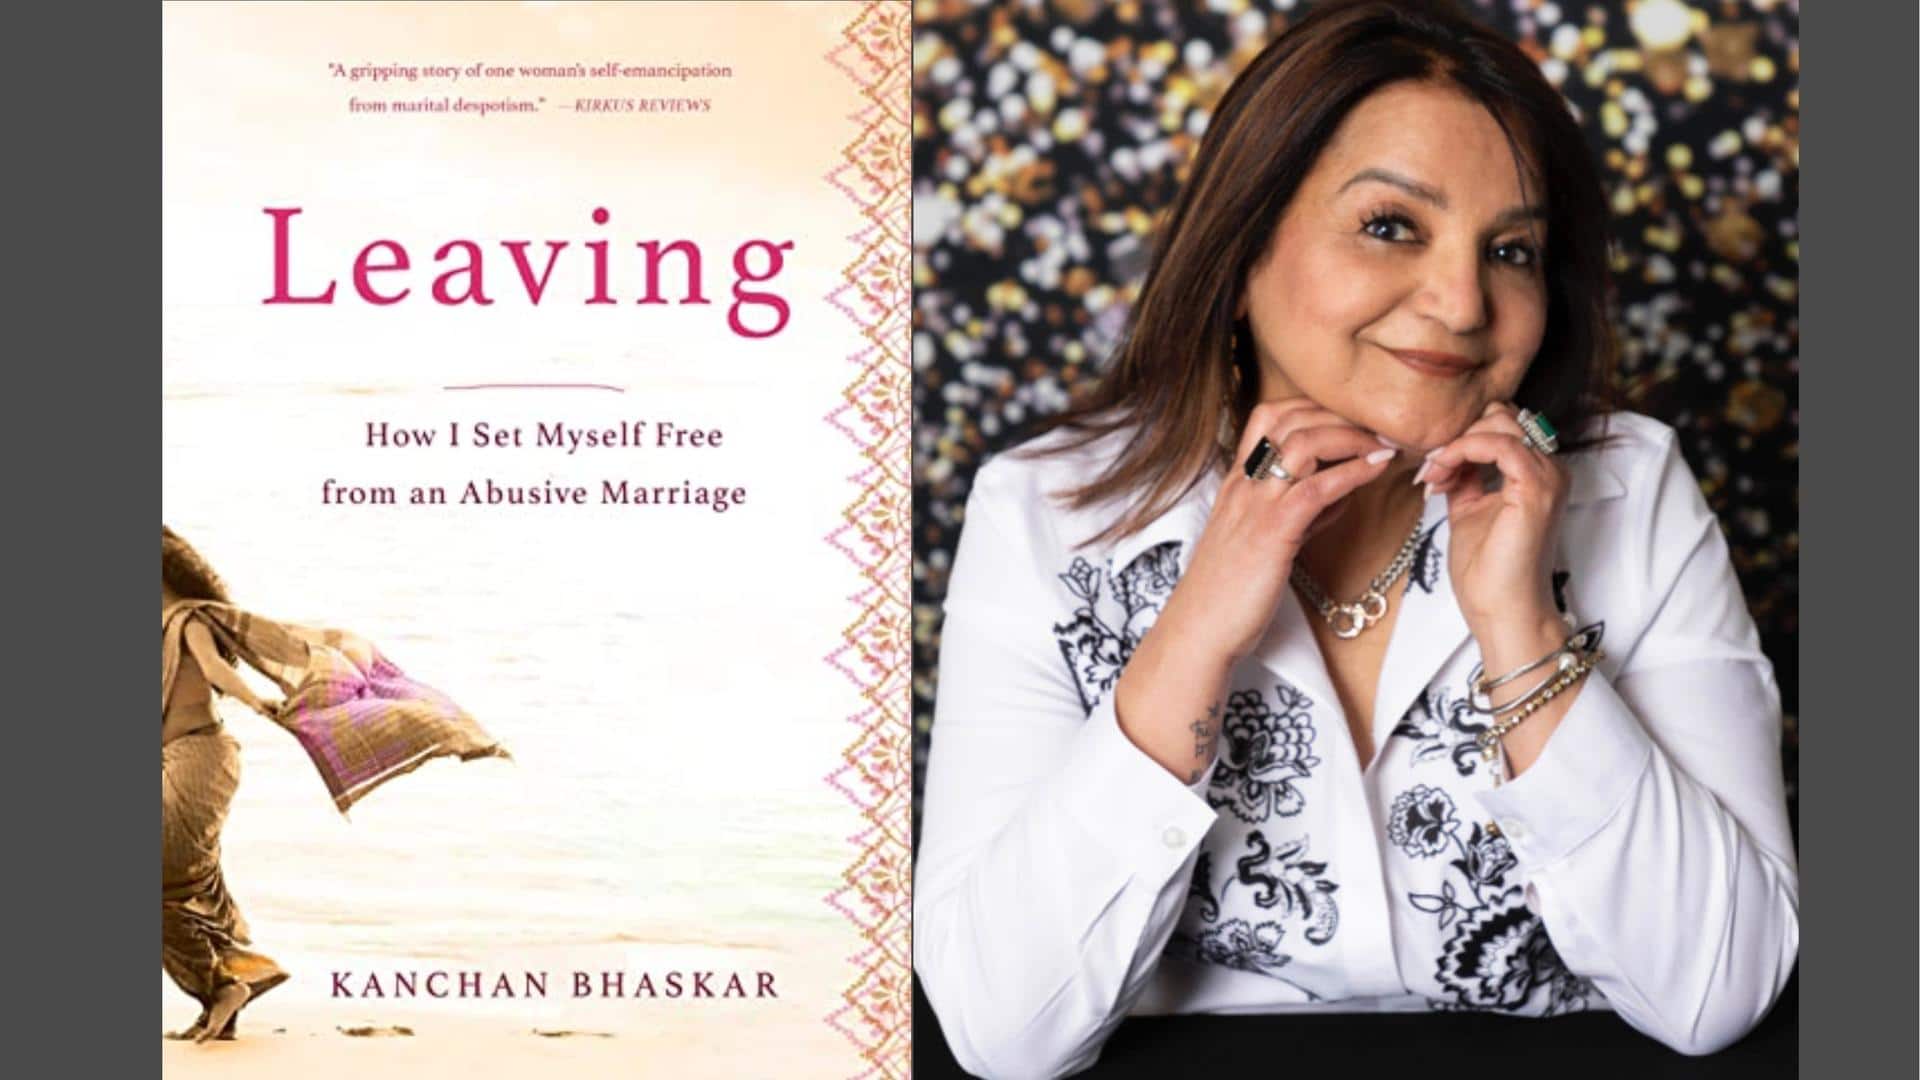 Book review: 'Leaving' - Powerful account of escaping domestic violence